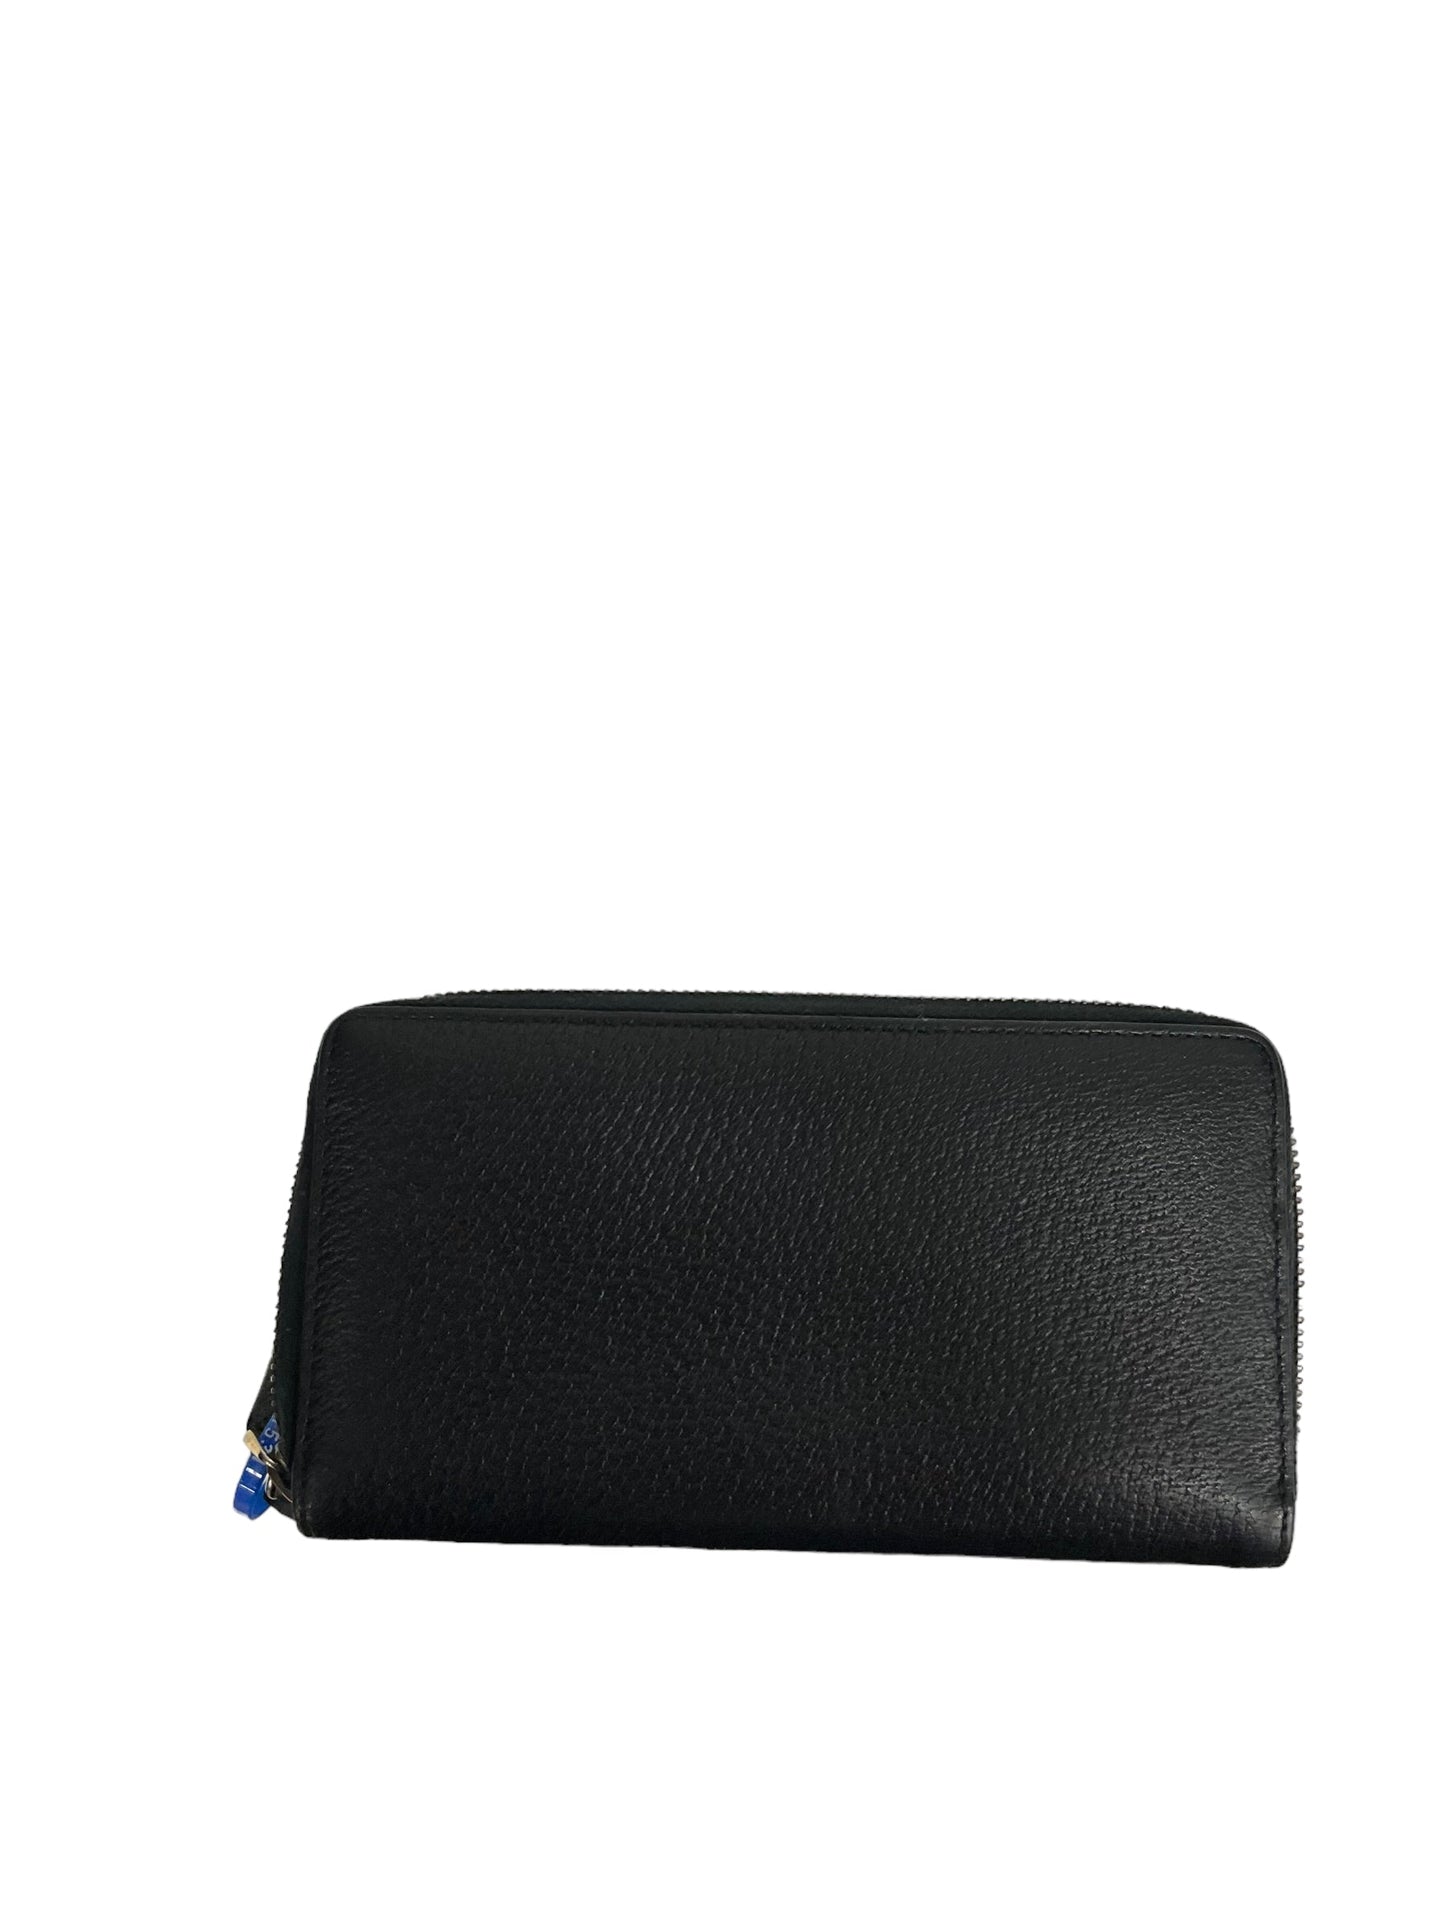 Wallet By Gucci  Size: Medium